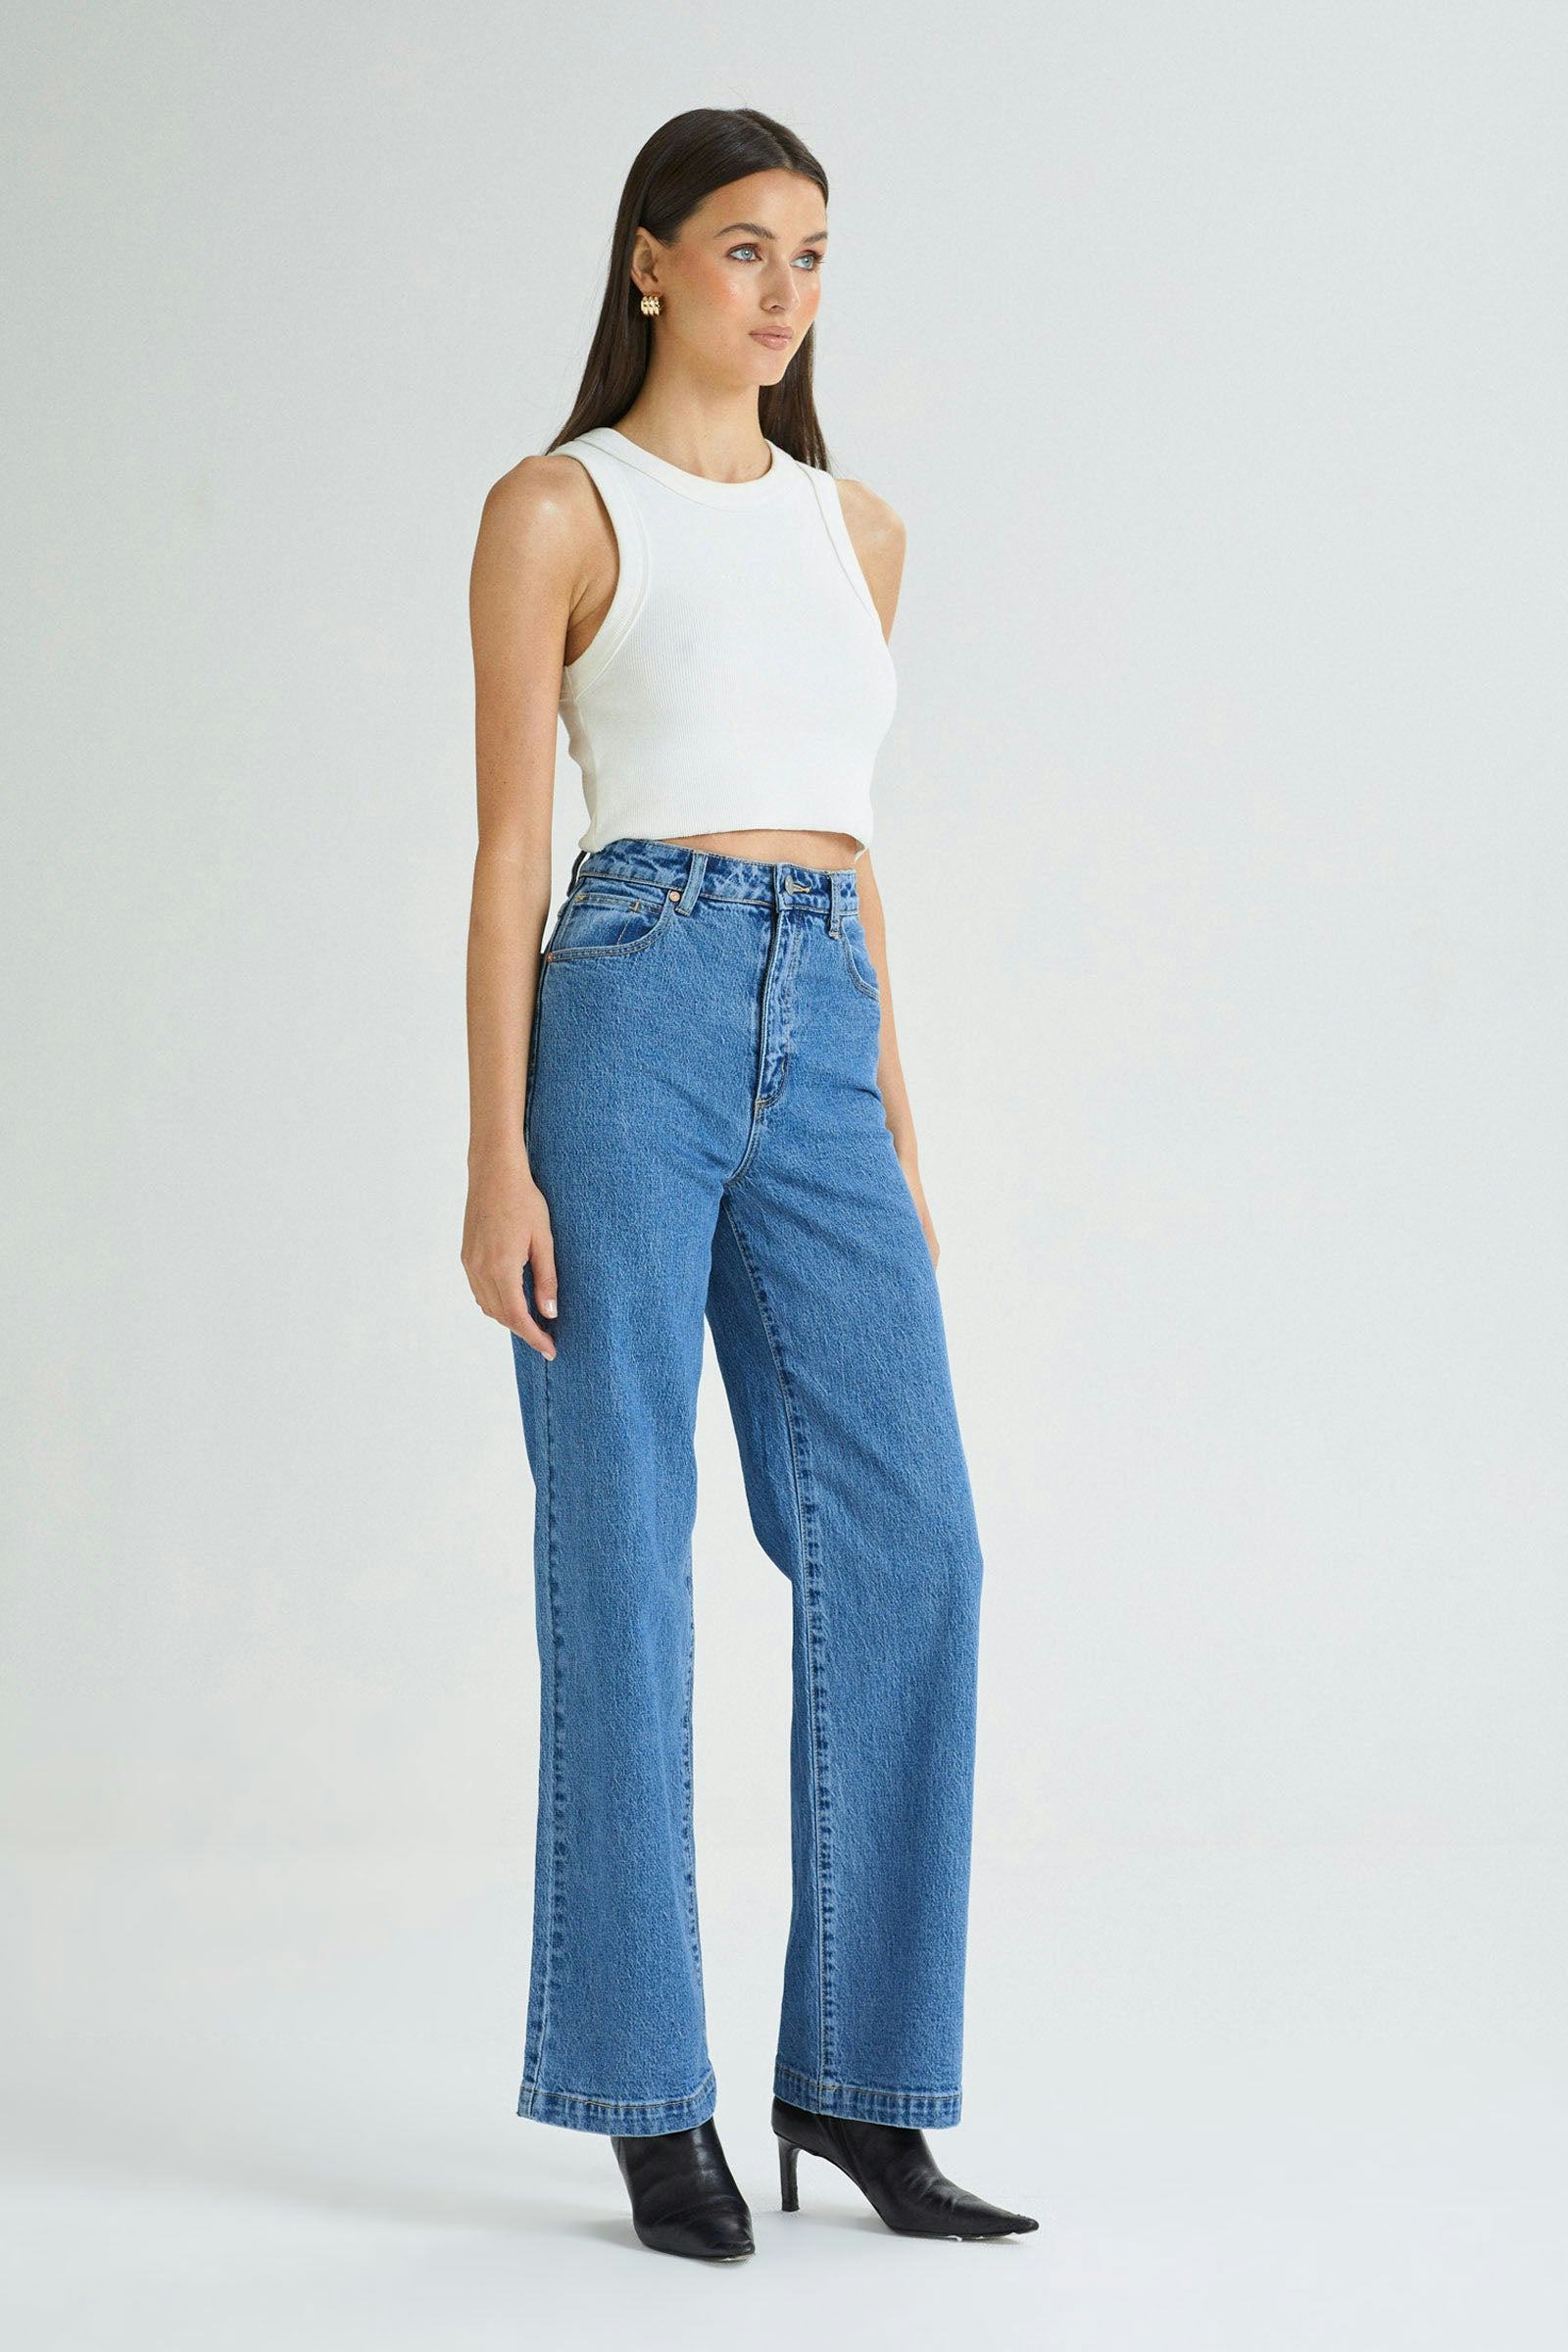 Buy 94 High & Wide Chantell Organic Online | Abrand Jeans